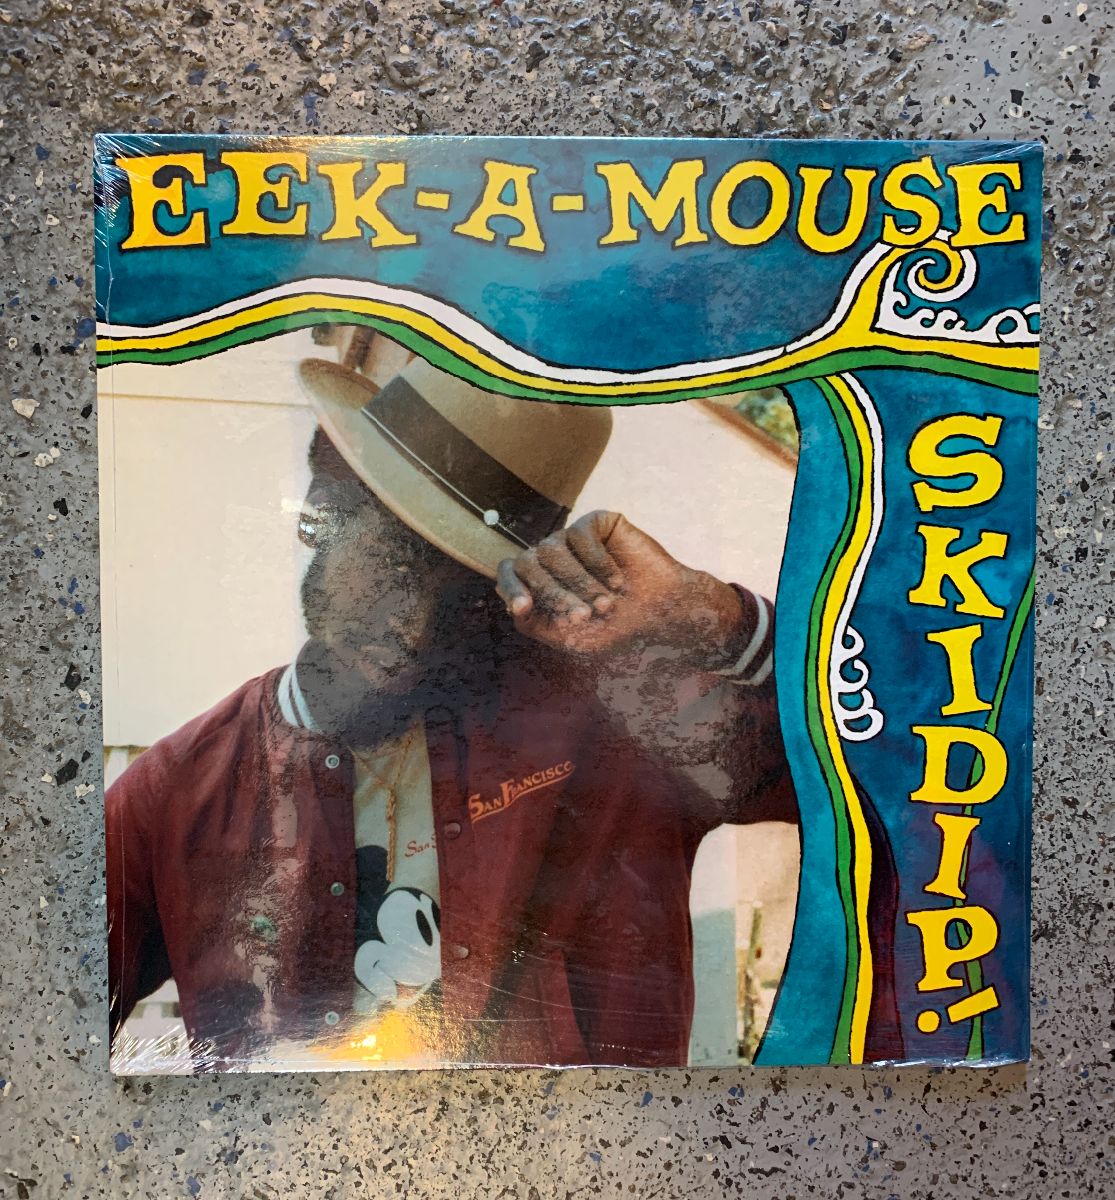 product details: BW VINYL - EEK-A-MOUSE - SKIDIP photo